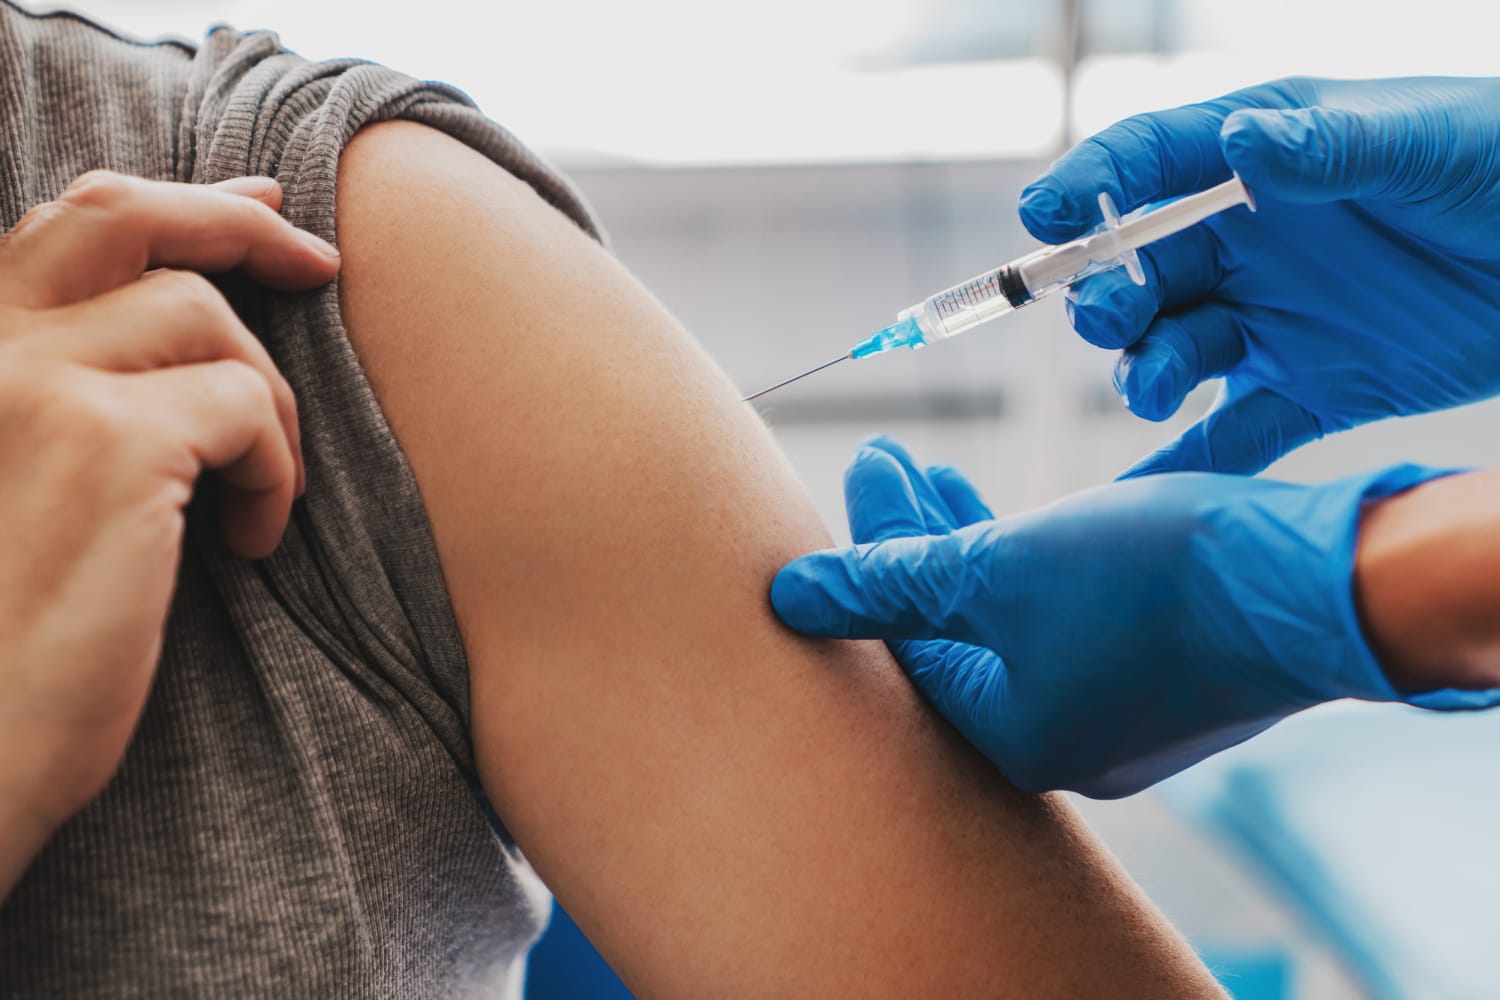 New York City to mandate Covid vaccinations for all private workers, de Blasio says